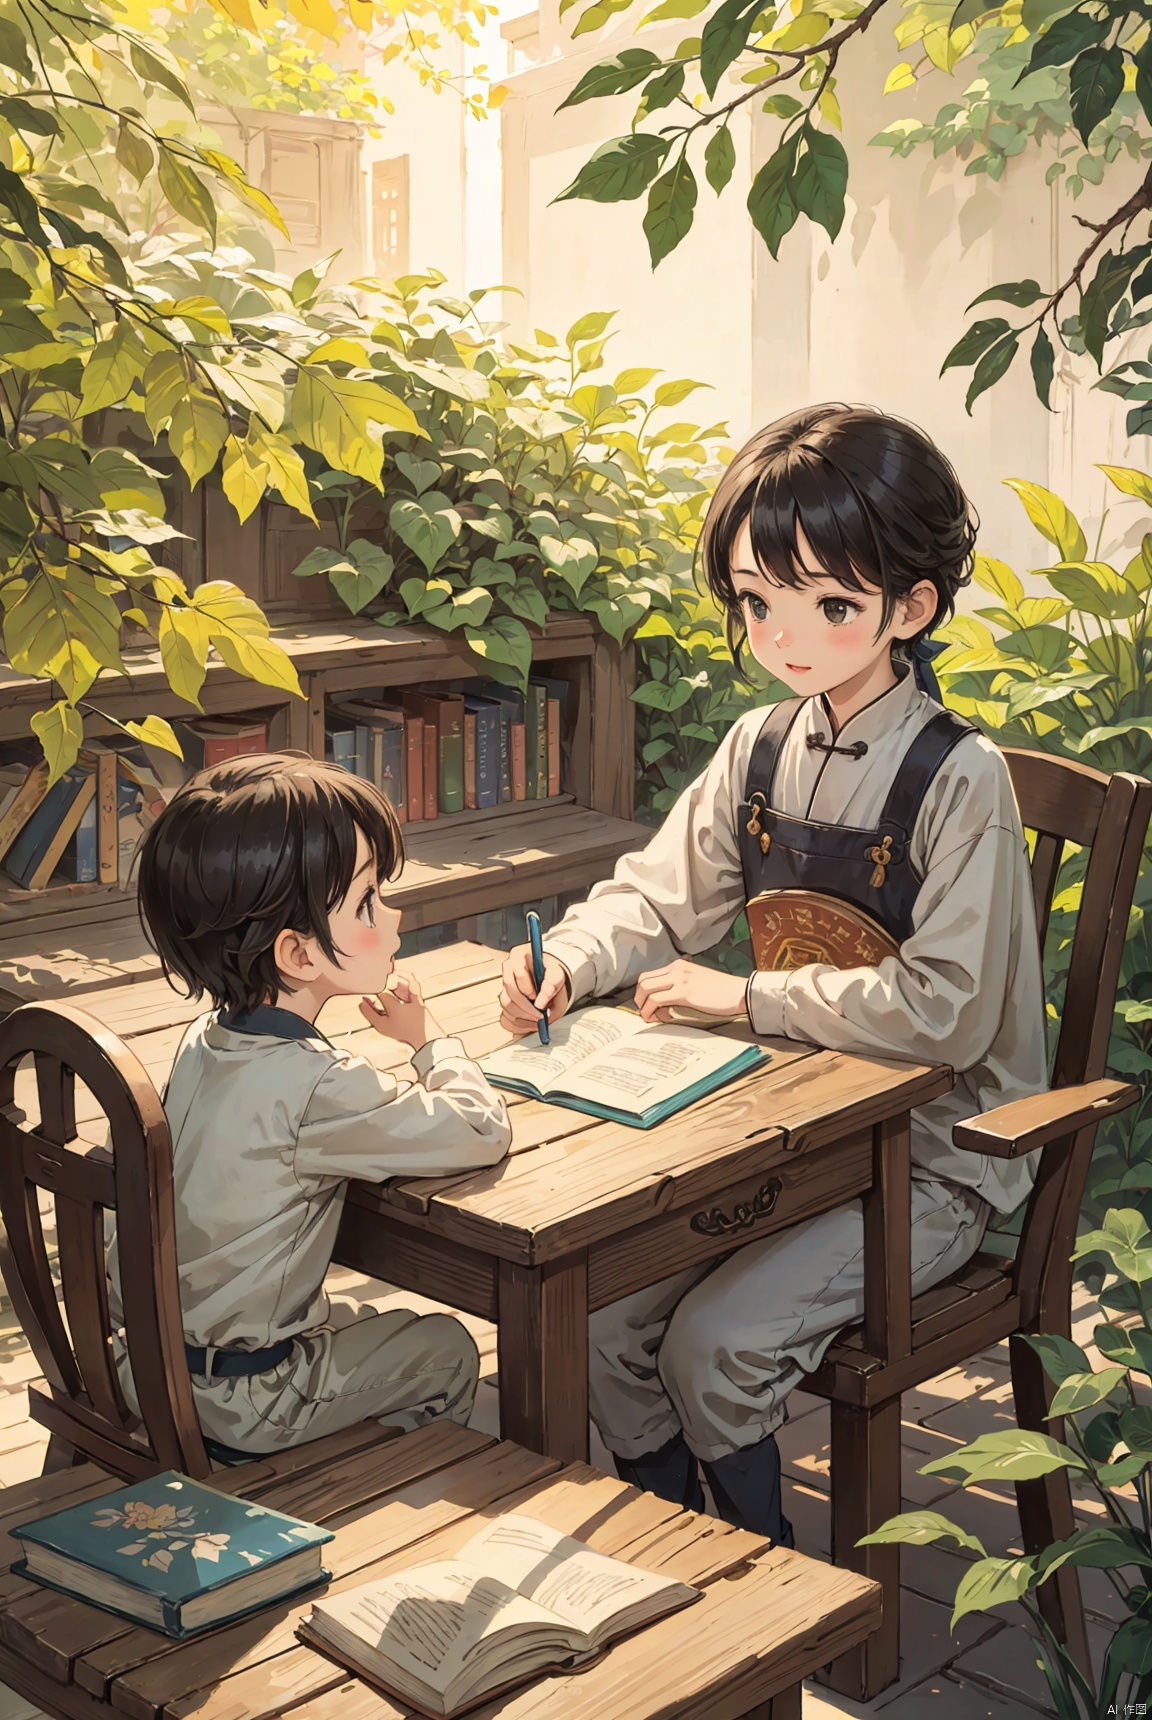 High definition perfect picture quality, masterpiece, China, rural quadrangles, small courtyards, sunlight falling through leaves (two little boys and two little girls), wooden tables and chairs, a pile of ancient books on the table, basking in the sun for leisure, warm visual effects, childhood memories, children's illustration books, rich picture backgrounds, perfect composition,
